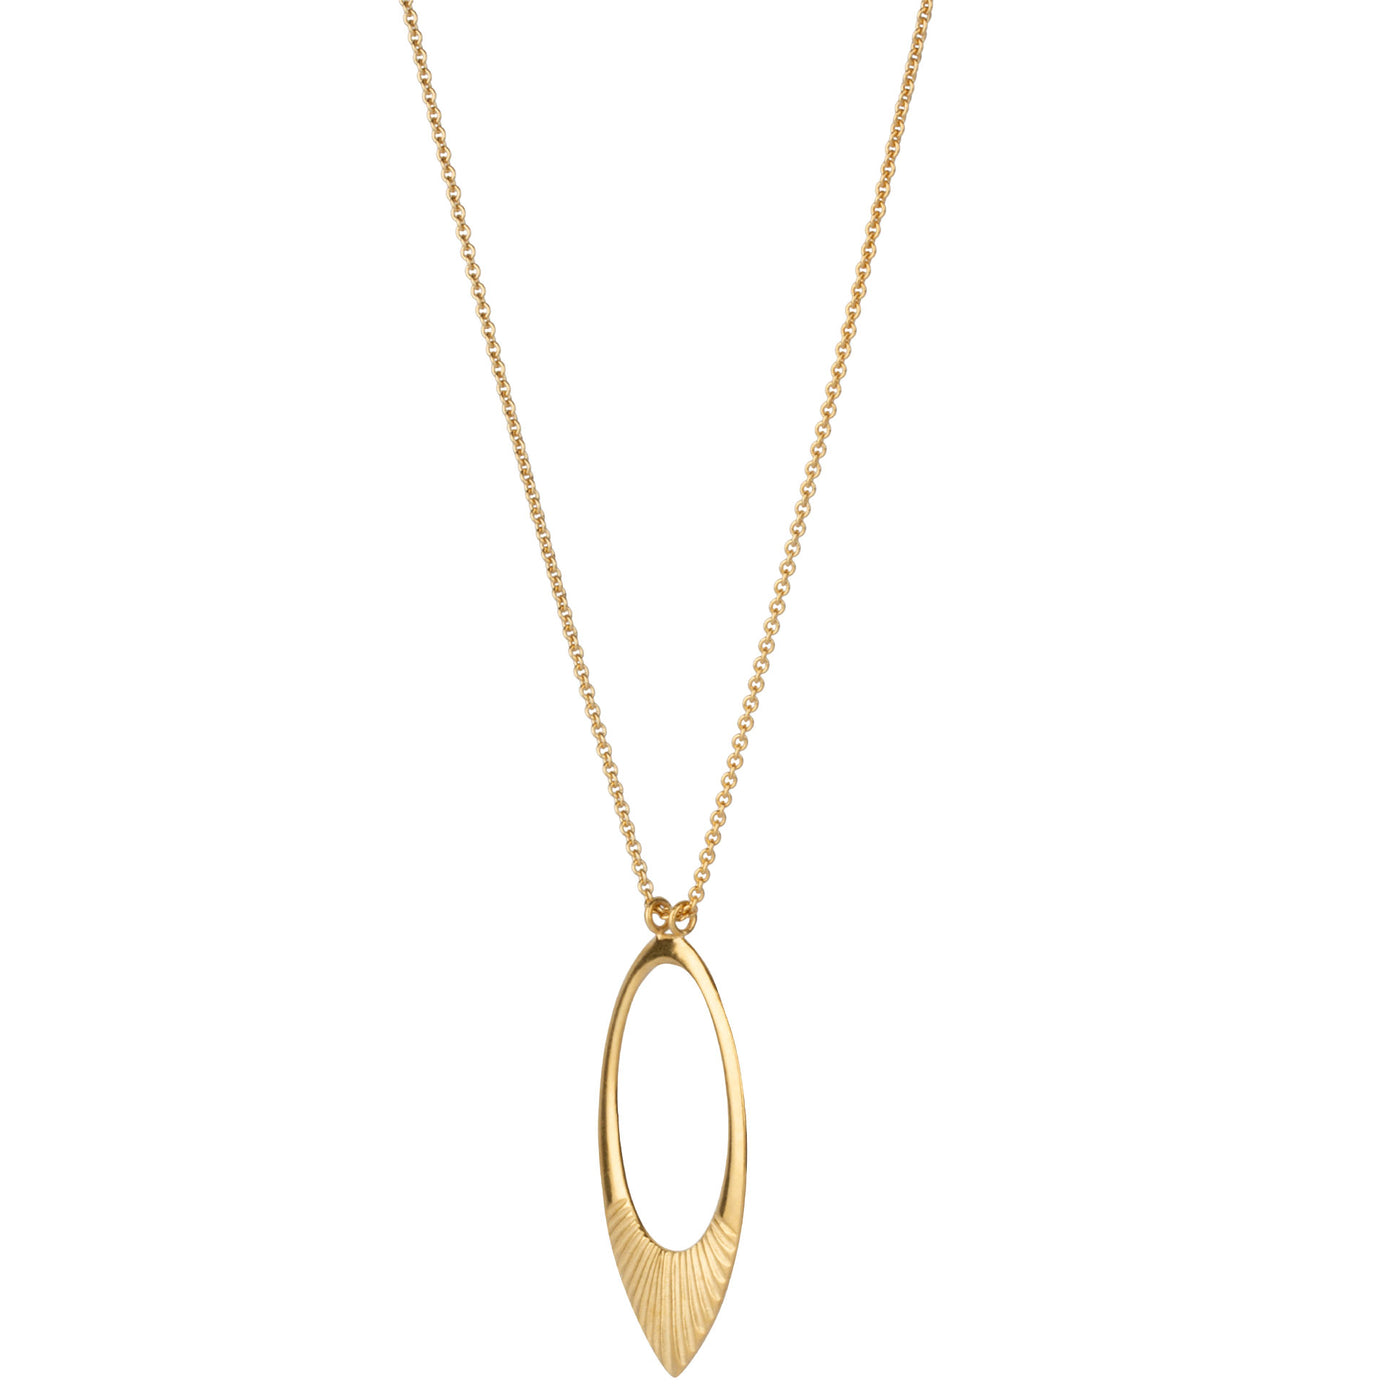 Side view of Ectra long neckalce with large open petal shape pendant with carved ray texture across the bottom on a white background